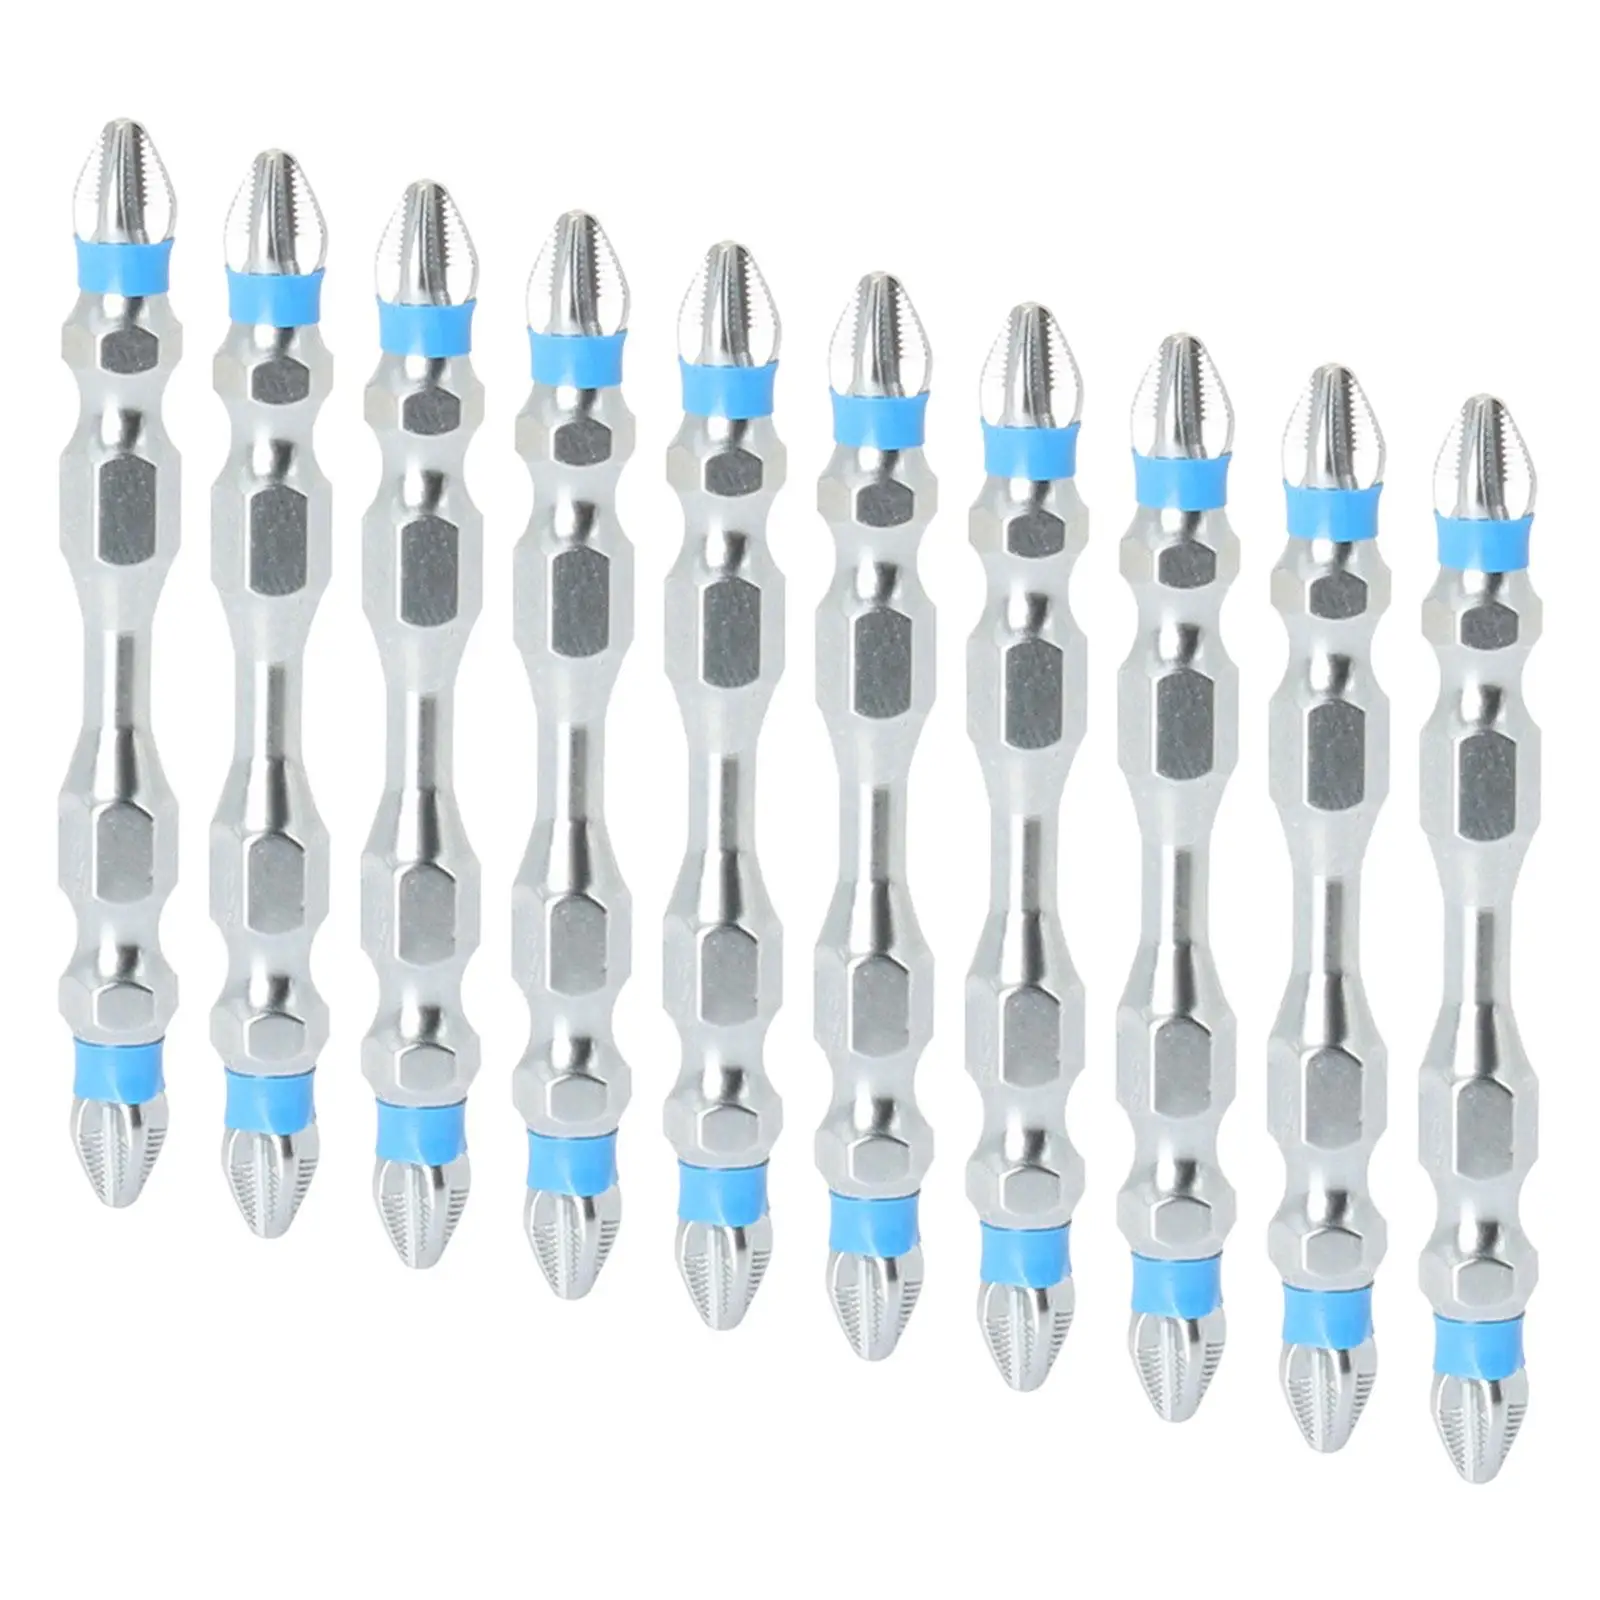 10Pcs Cross Screw Head Hand Tools Electric Screwdriver Bit for Engineering Electrician Woodworking Household Repair Appliances